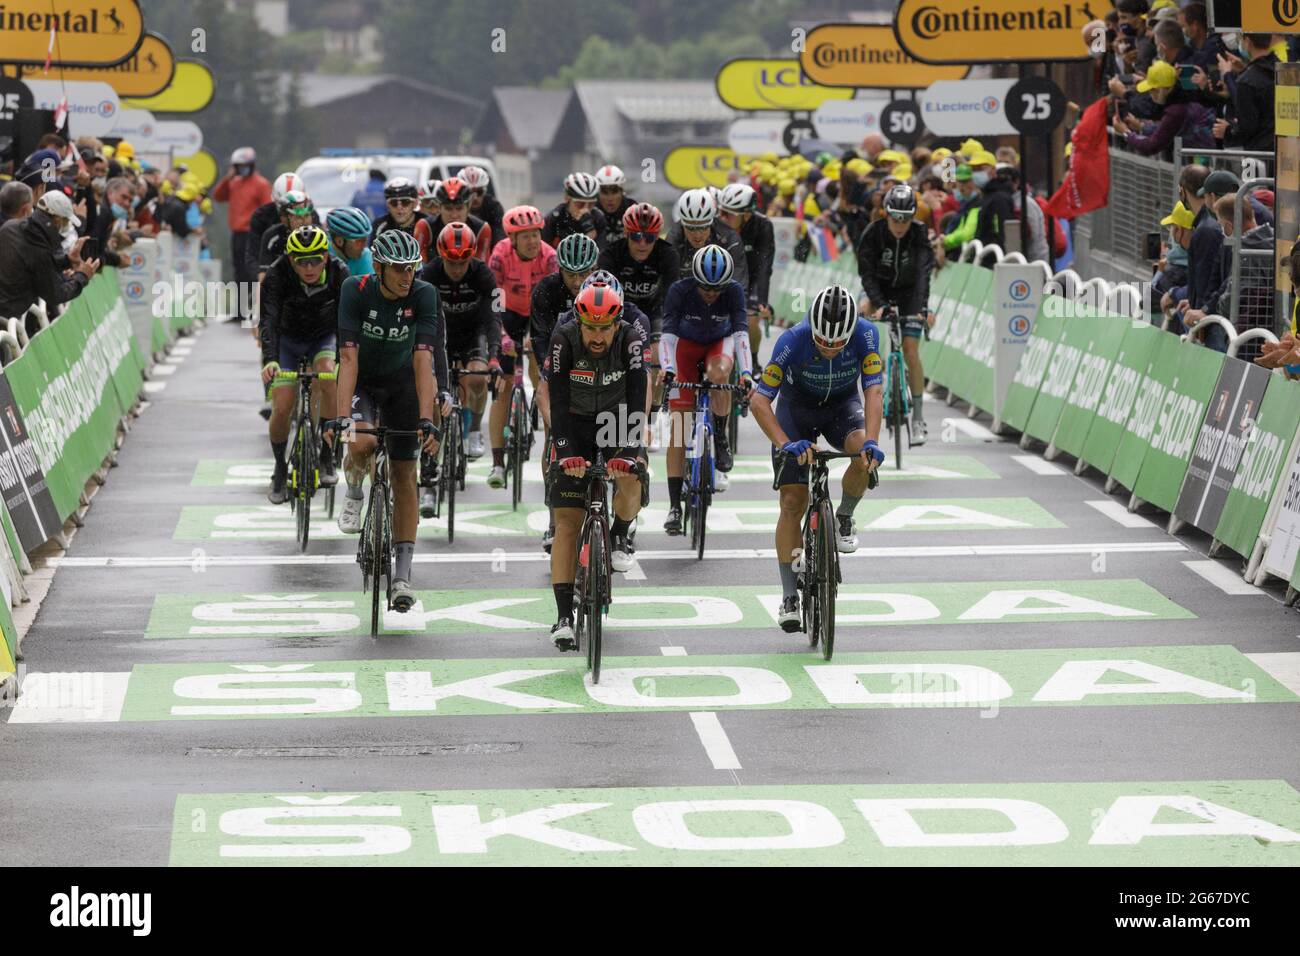 Le Grand-Bornand, France. 03 July 2021. The last of the riders approach the finish line of the 8th stage of the Tour de France. Julian Elliott News Photography Credit: Julian Elliott/Alamy Live News Stock Photo